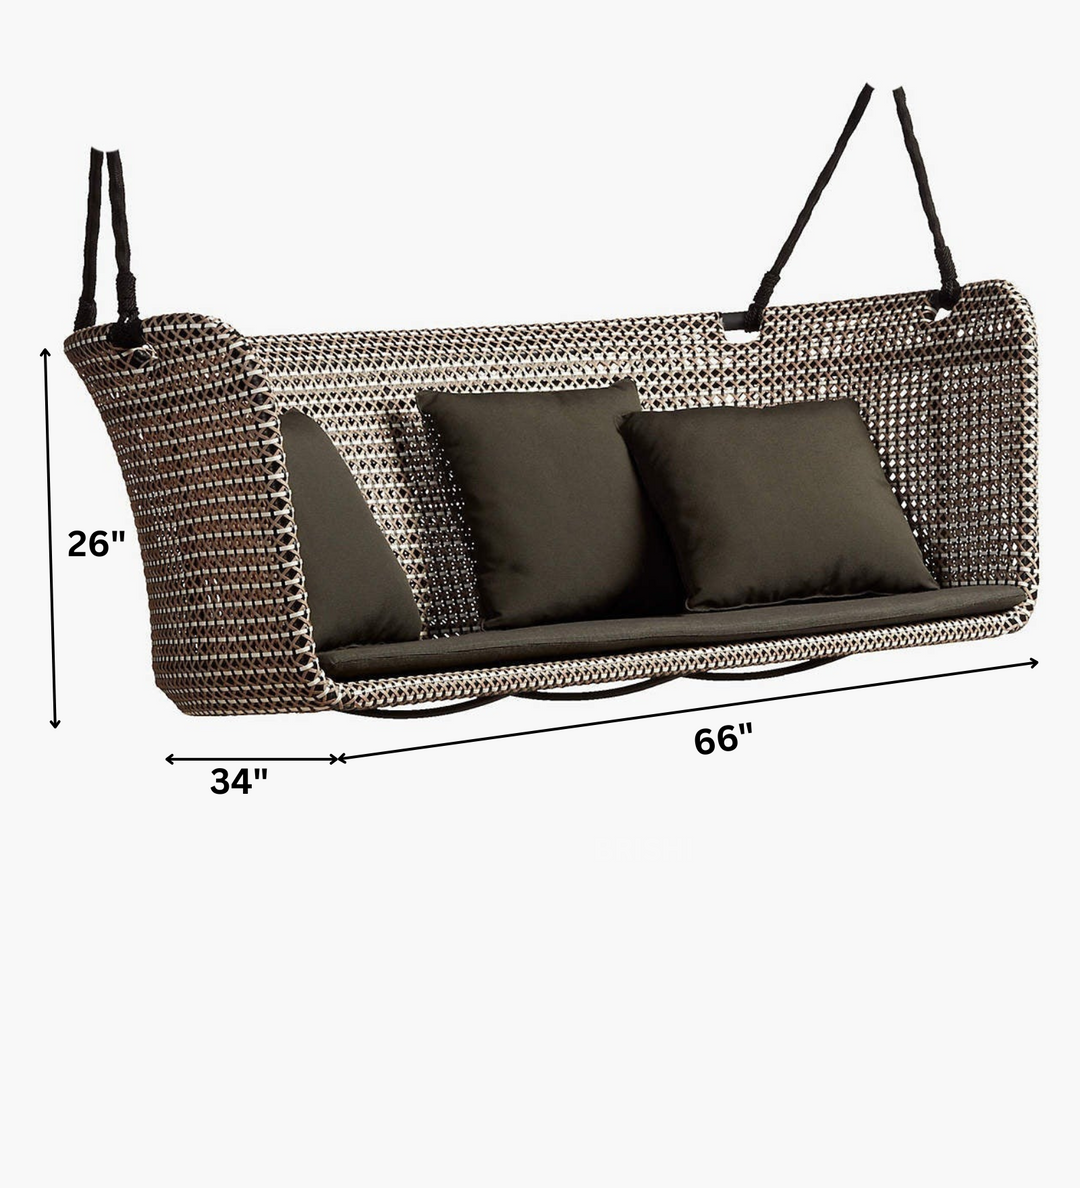 Barbara Three Seater Hanging Swing Without Stand For Balcony , Garden Swing (Brown, Light Brown, White)